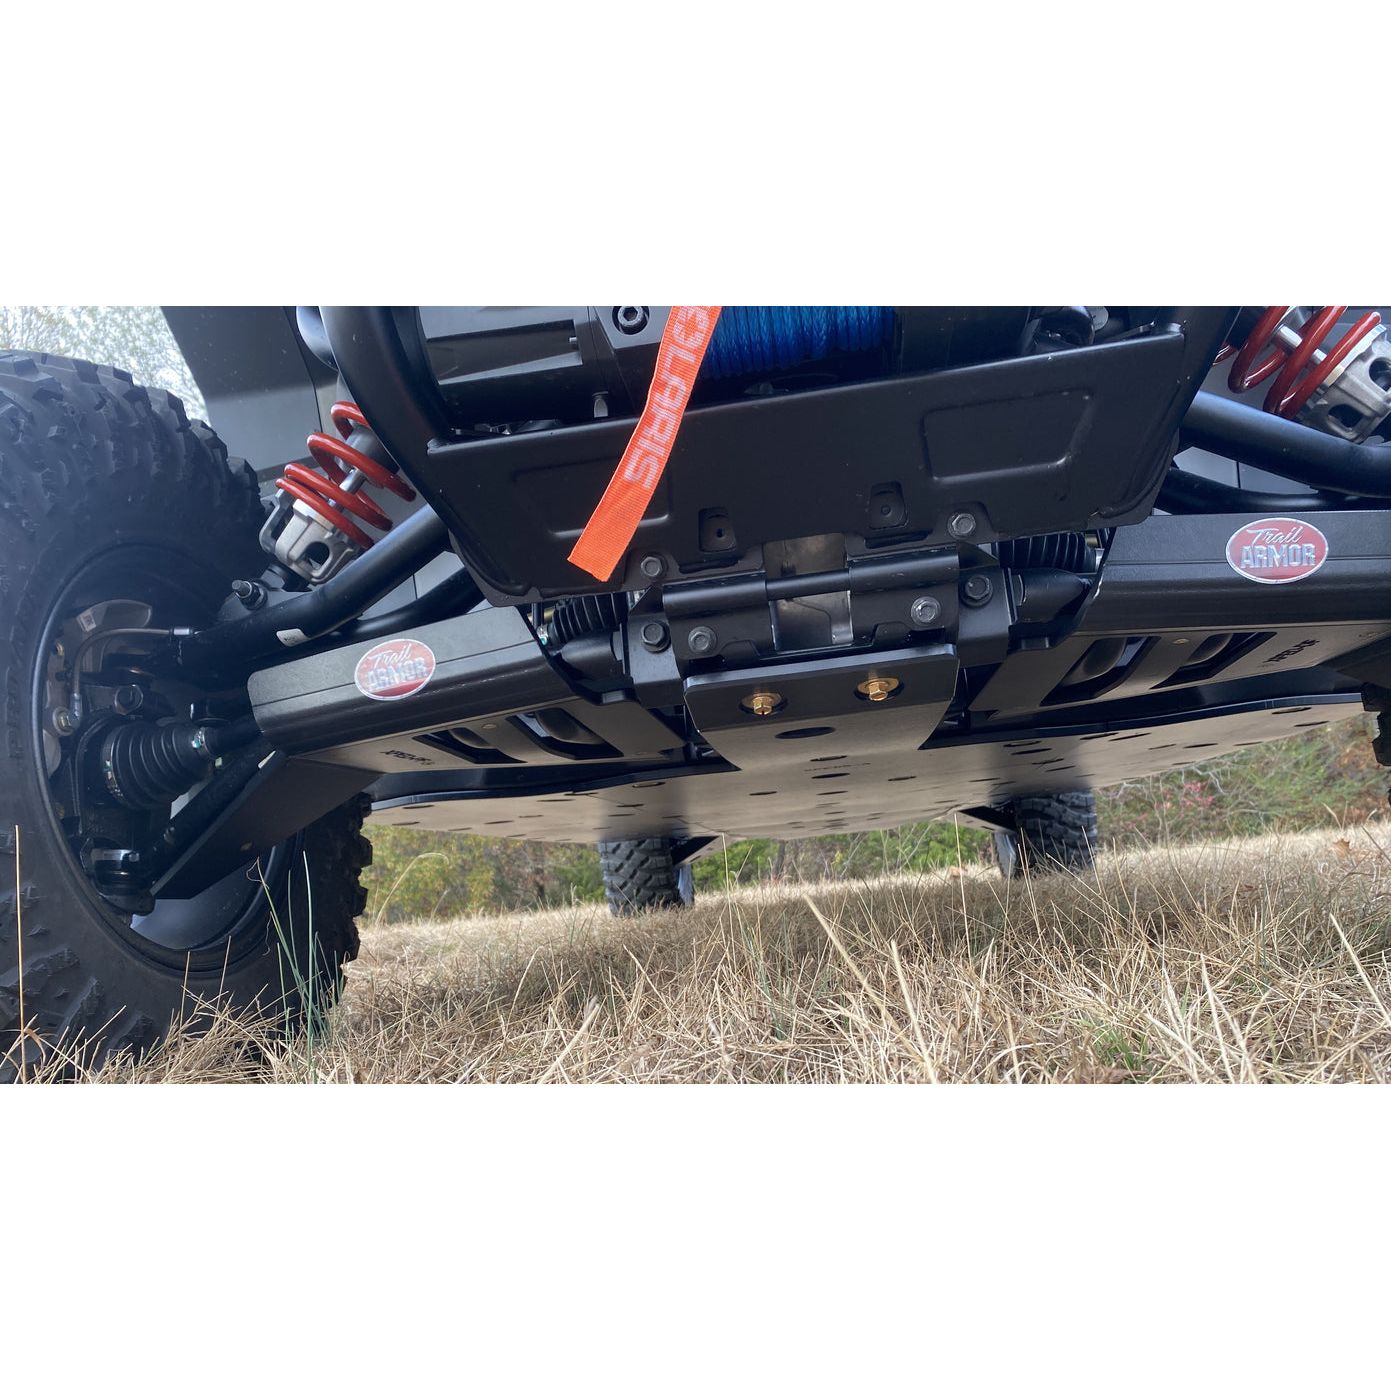 Polaris Xpedition Full Skid Plate | Trail Armor